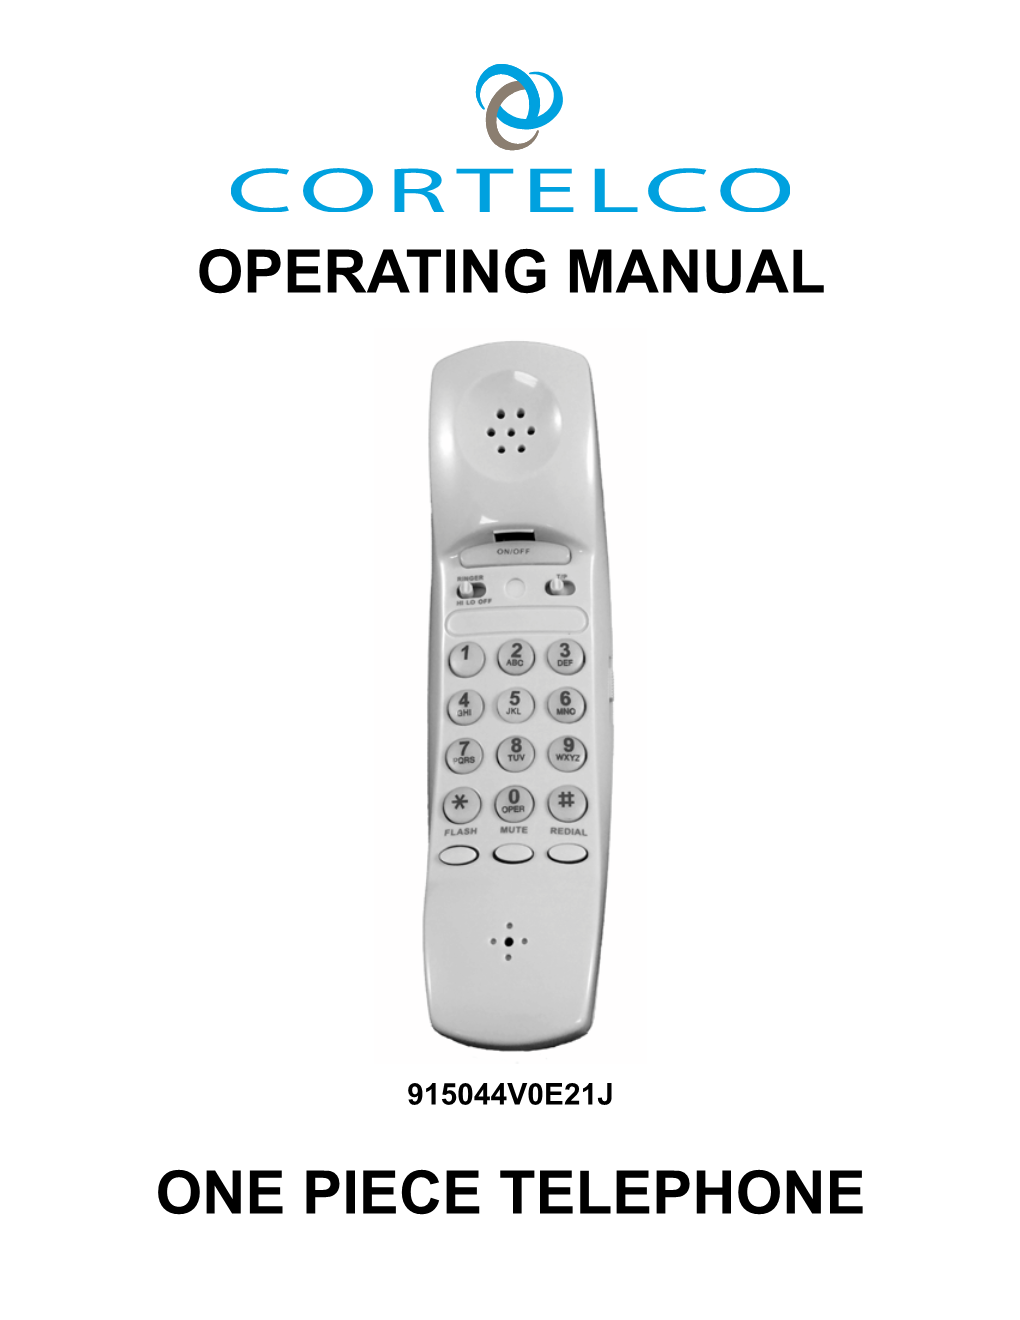 Operating Manual One Piece Telephone